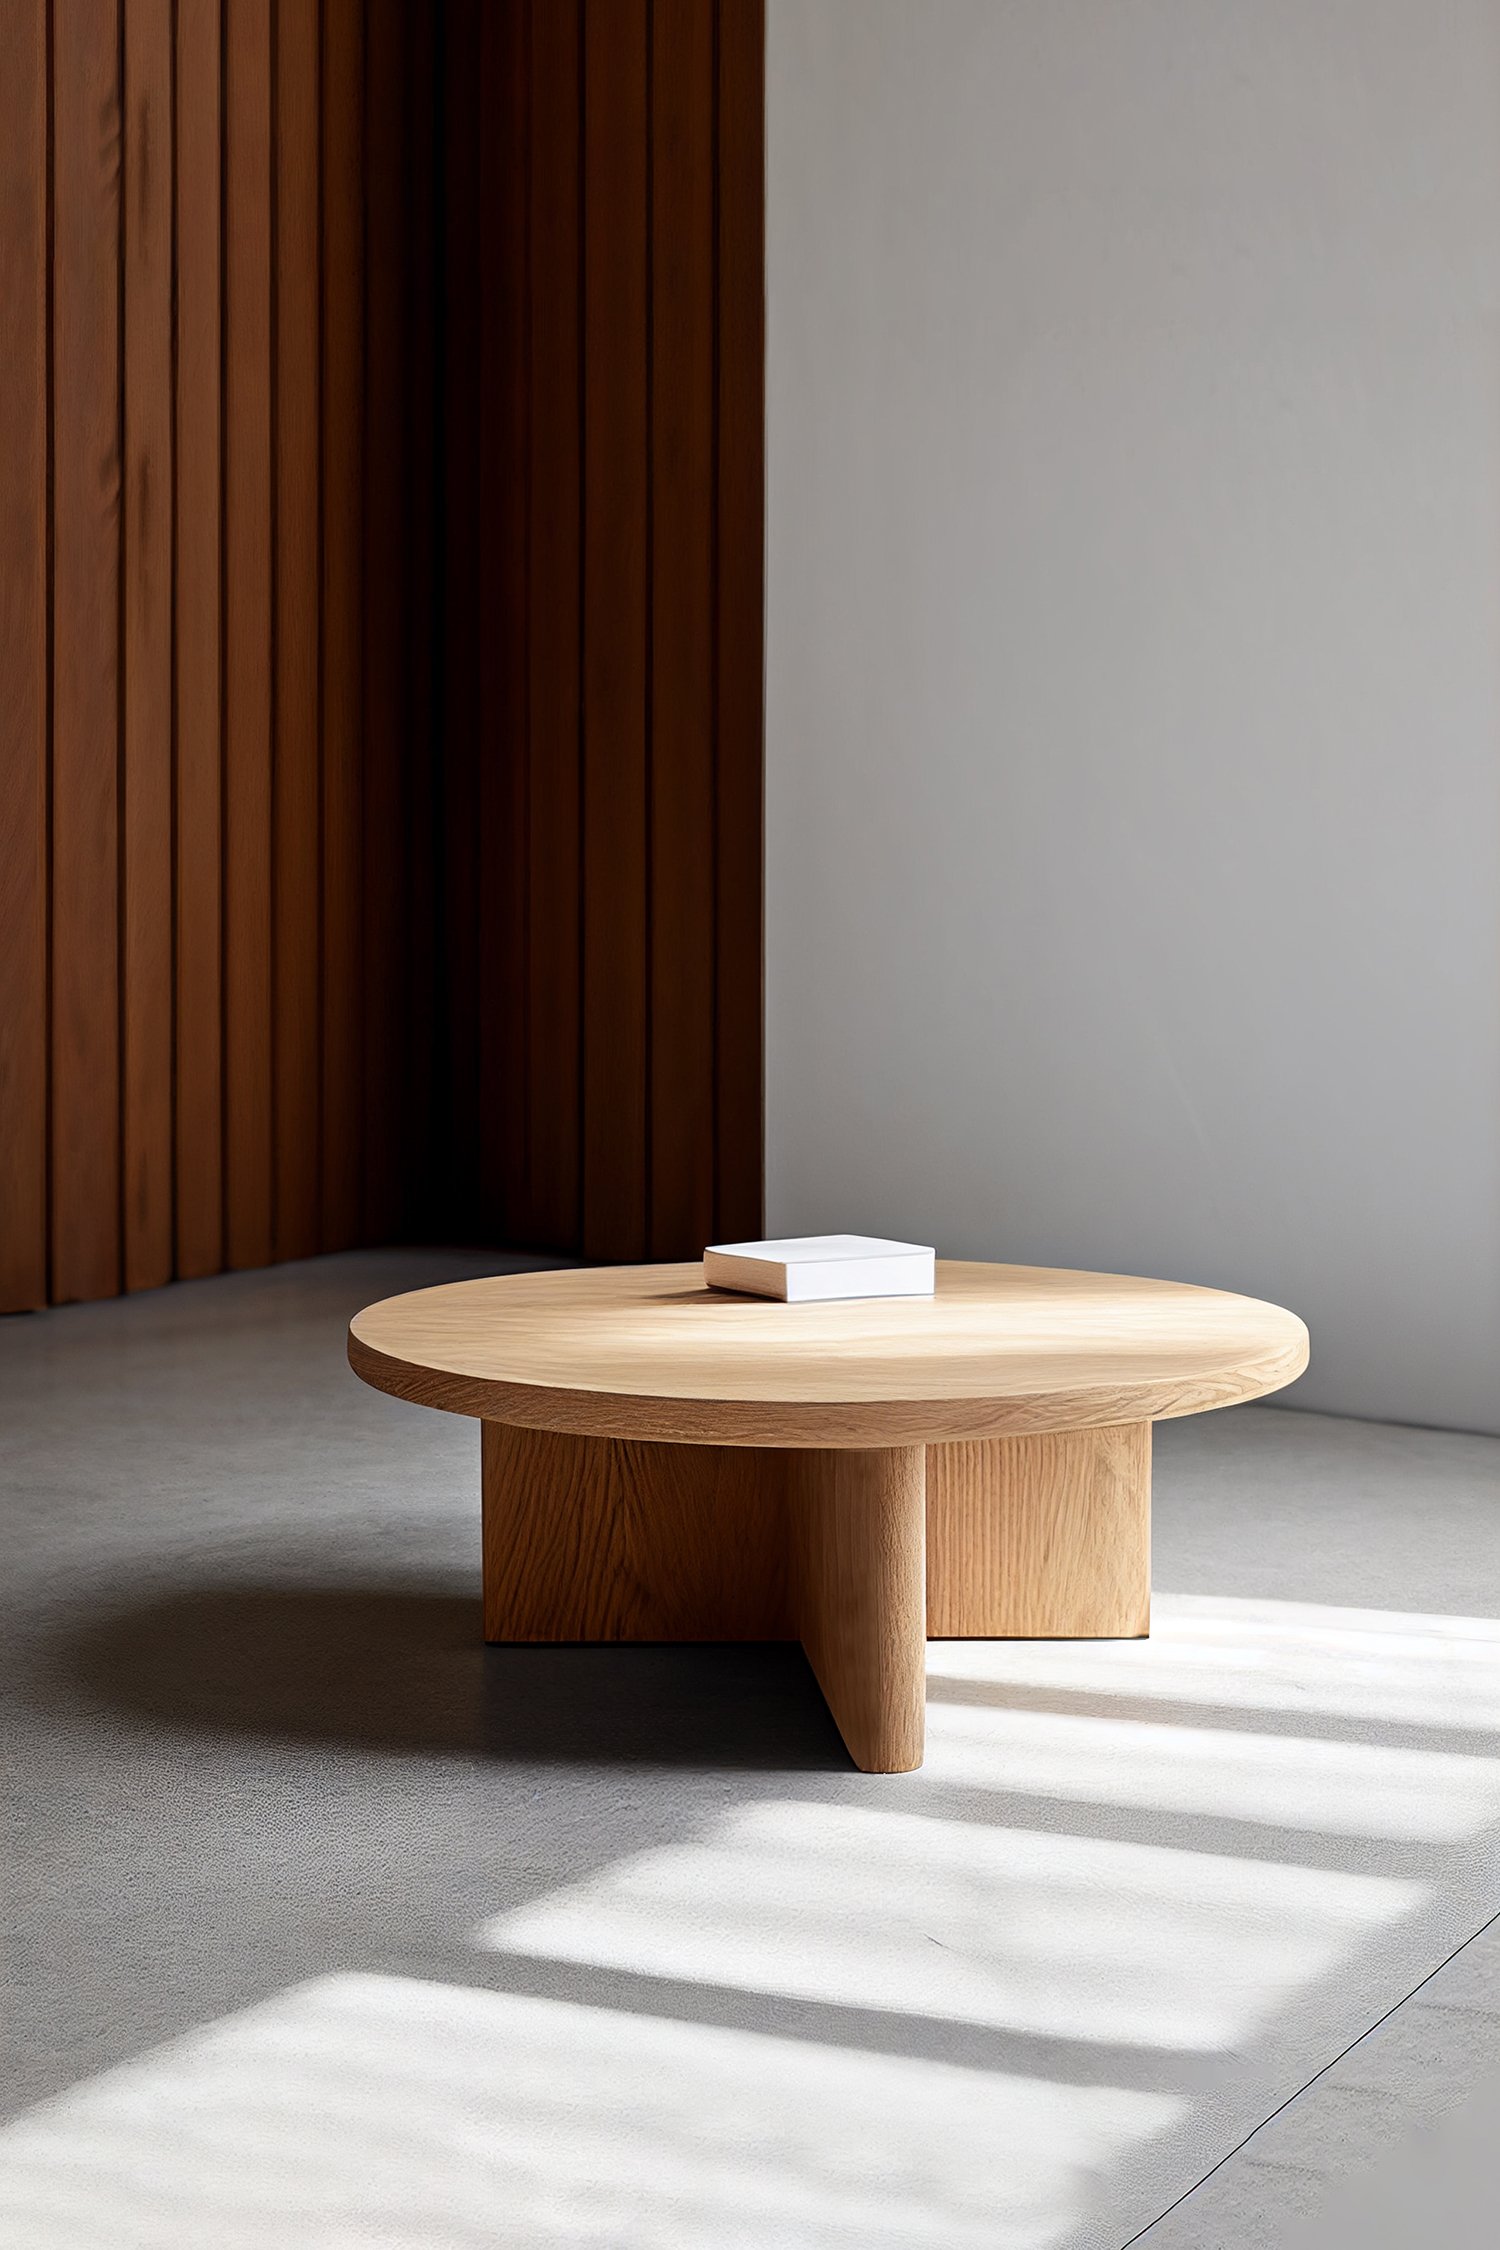 Cruciform Solid Wood Round Table By NONO 3.jpg